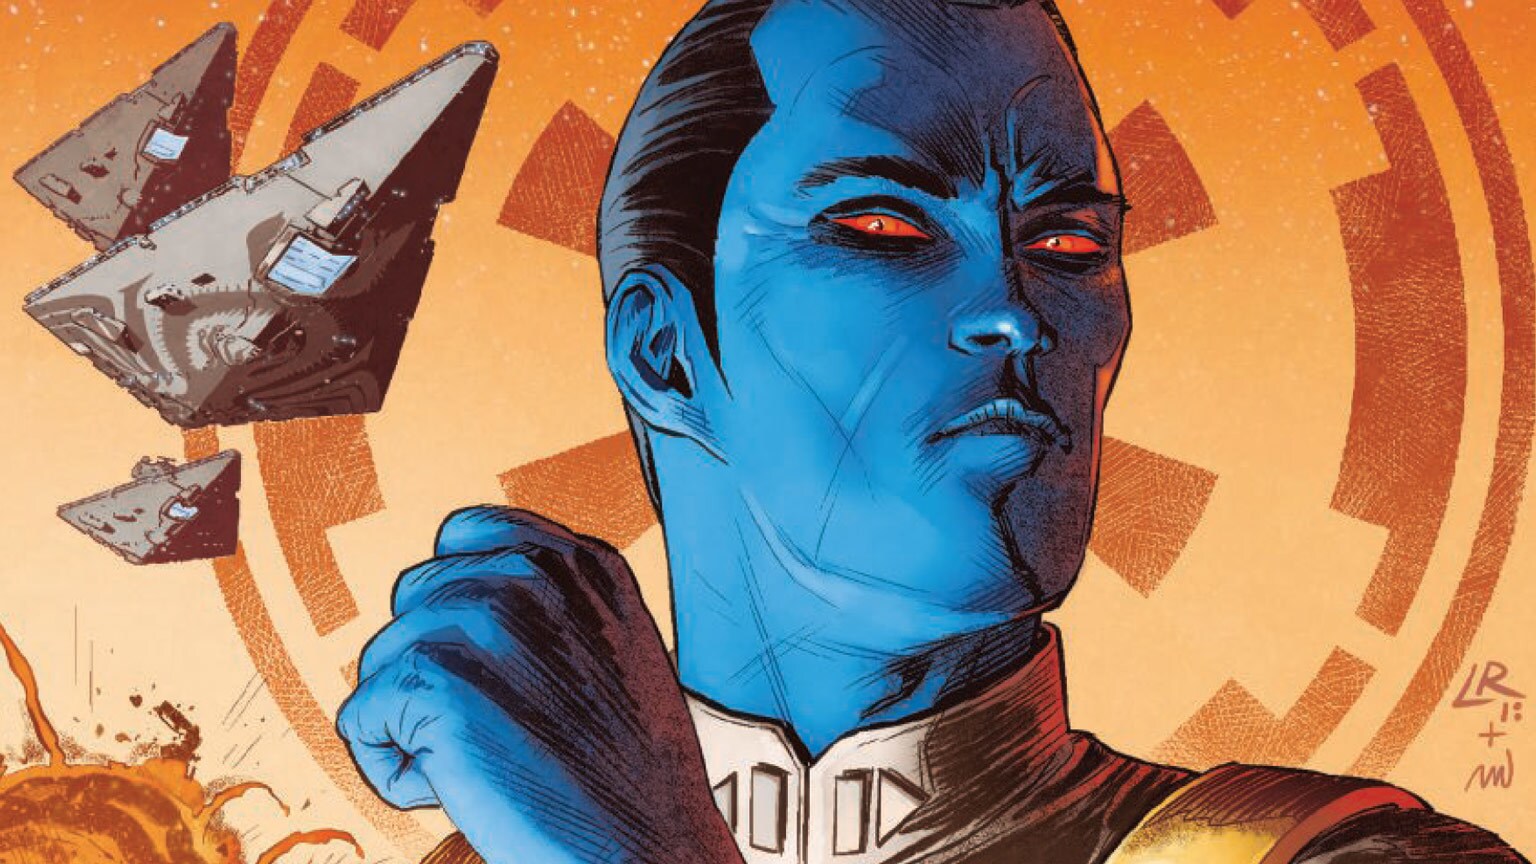 The Galaxy in Comics: Thrawn #6 and Choices That Ripple Across the Stars